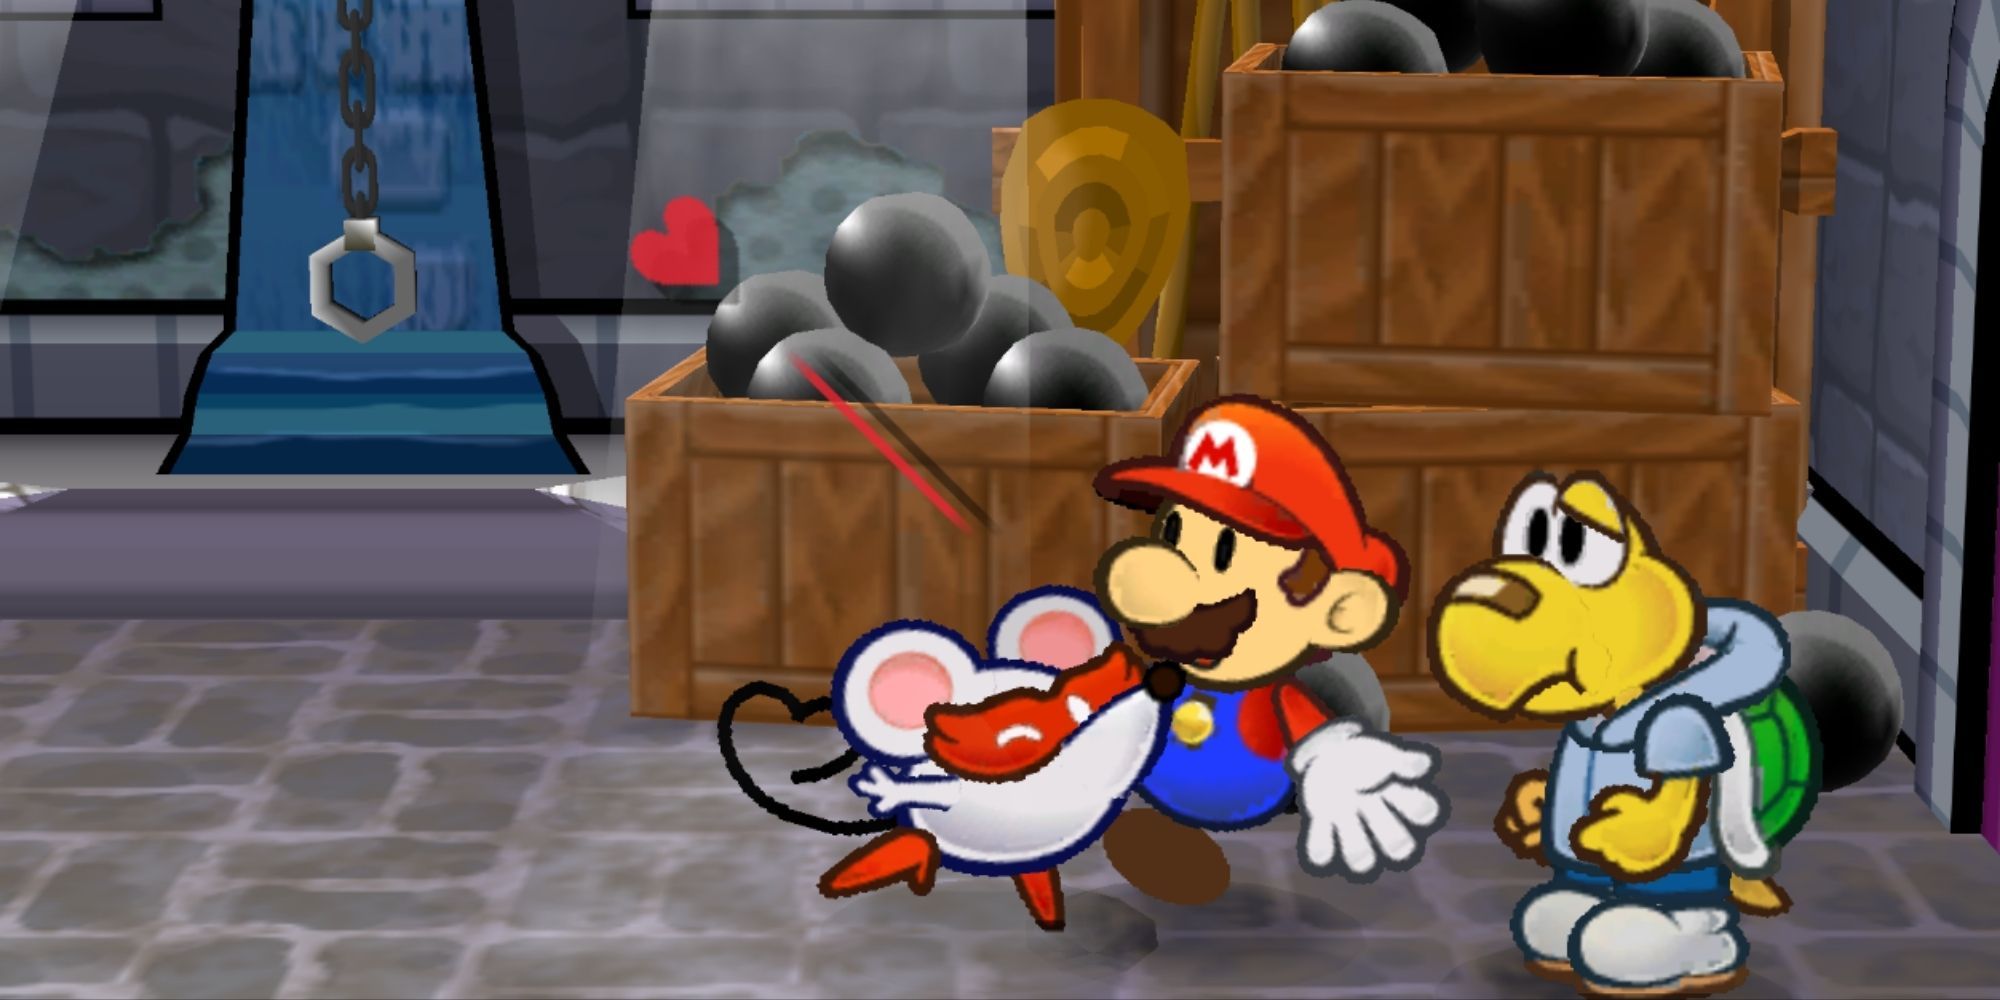 Paper Mario Ms. Mowz Gives Mario A Smooch In Hooktails Castle